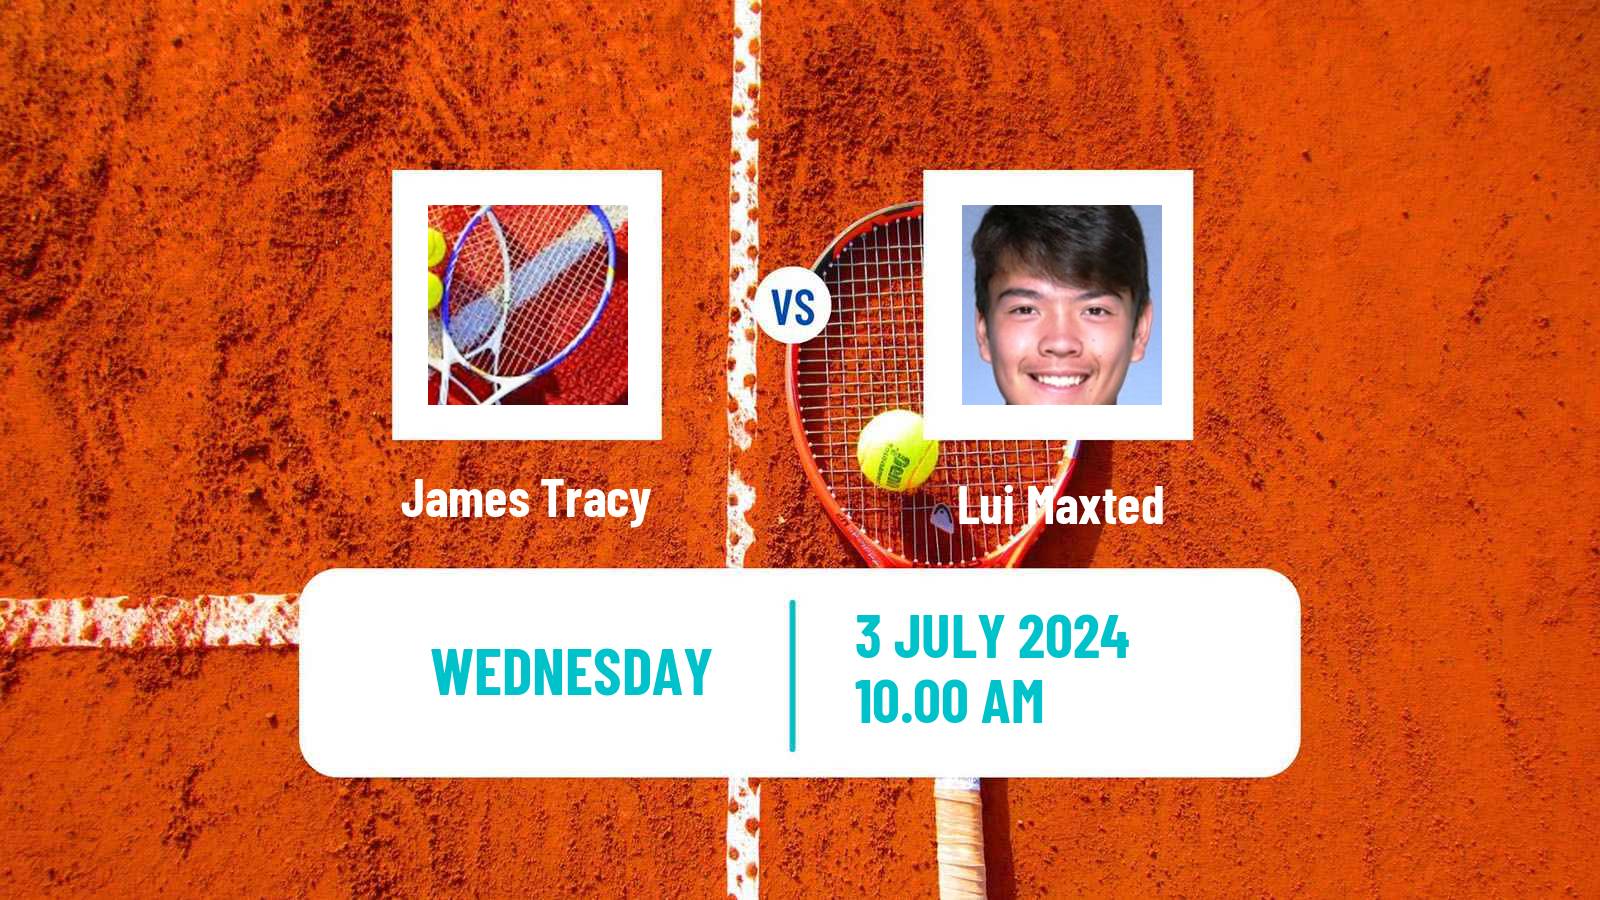 Tennis ITF M25 Laval Men James Tracy - Lui Maxted